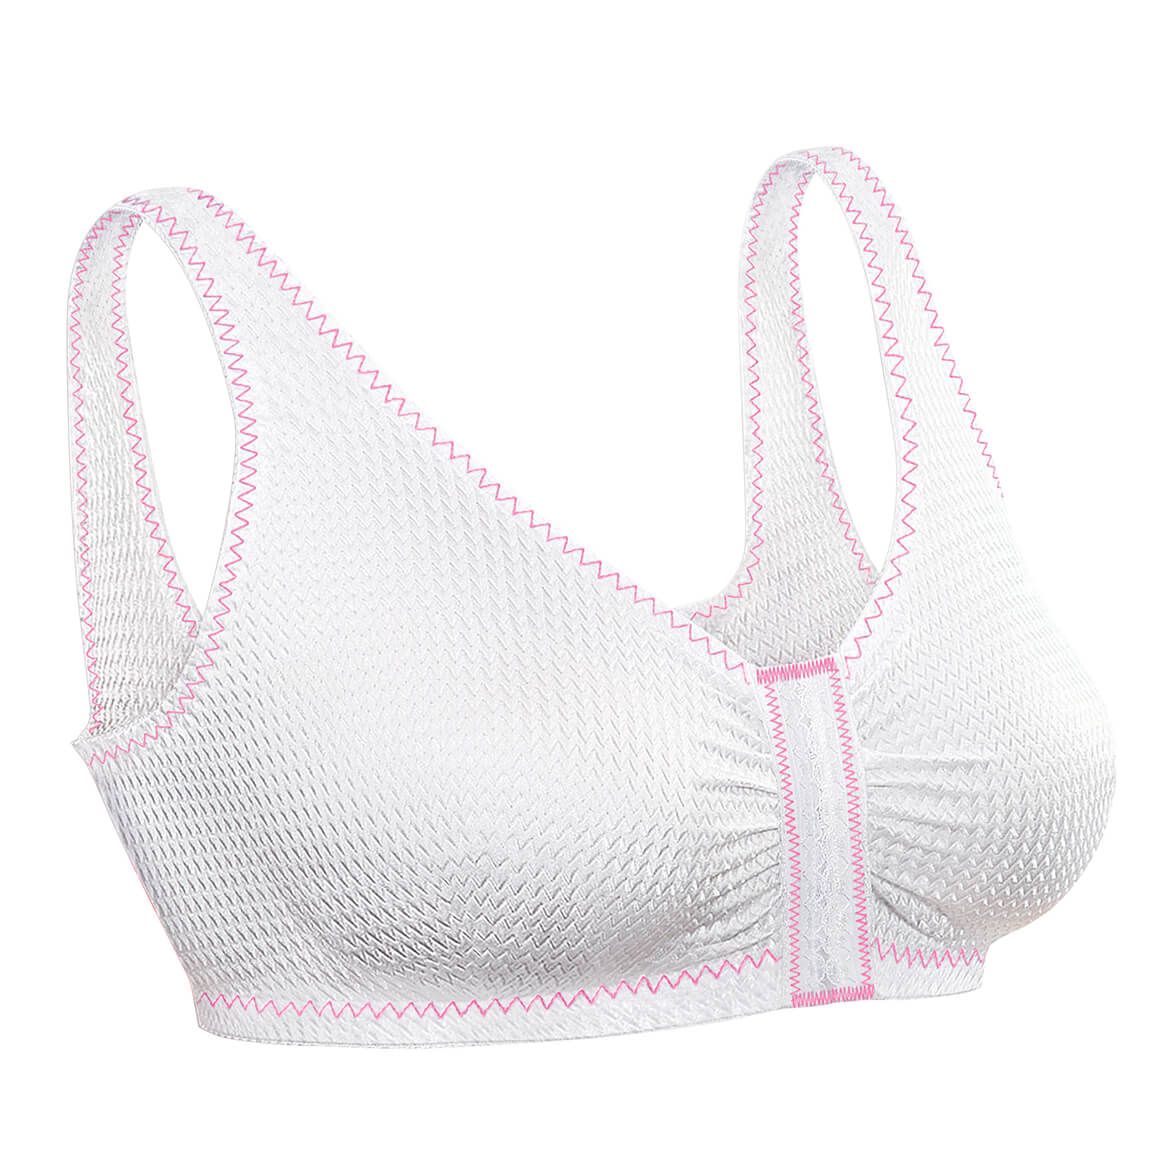 This Half Cup Net Bra has a unique design that is both comfortable and  stylish. The cup is made of a soft, stretchy material that conforms to your  body, while